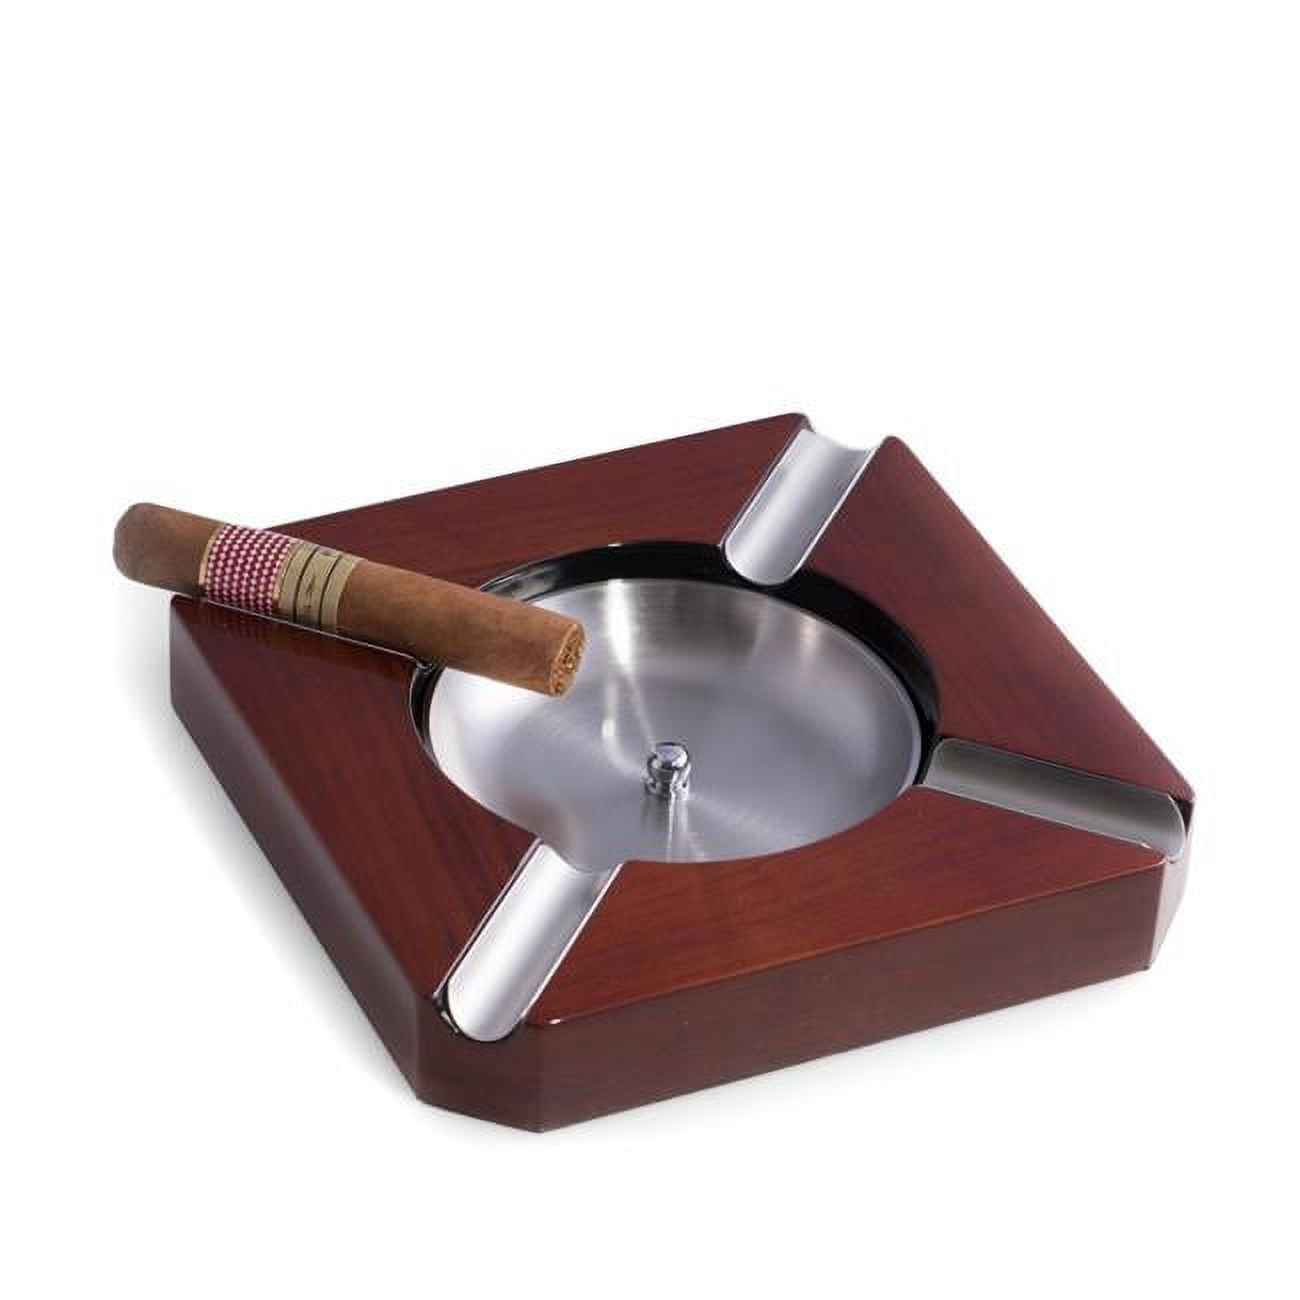 Picture of Bey-Berk International C315 Lacquered 4 Cigar Ashtray with Removable Stainless Steel Center - Walnut Wood